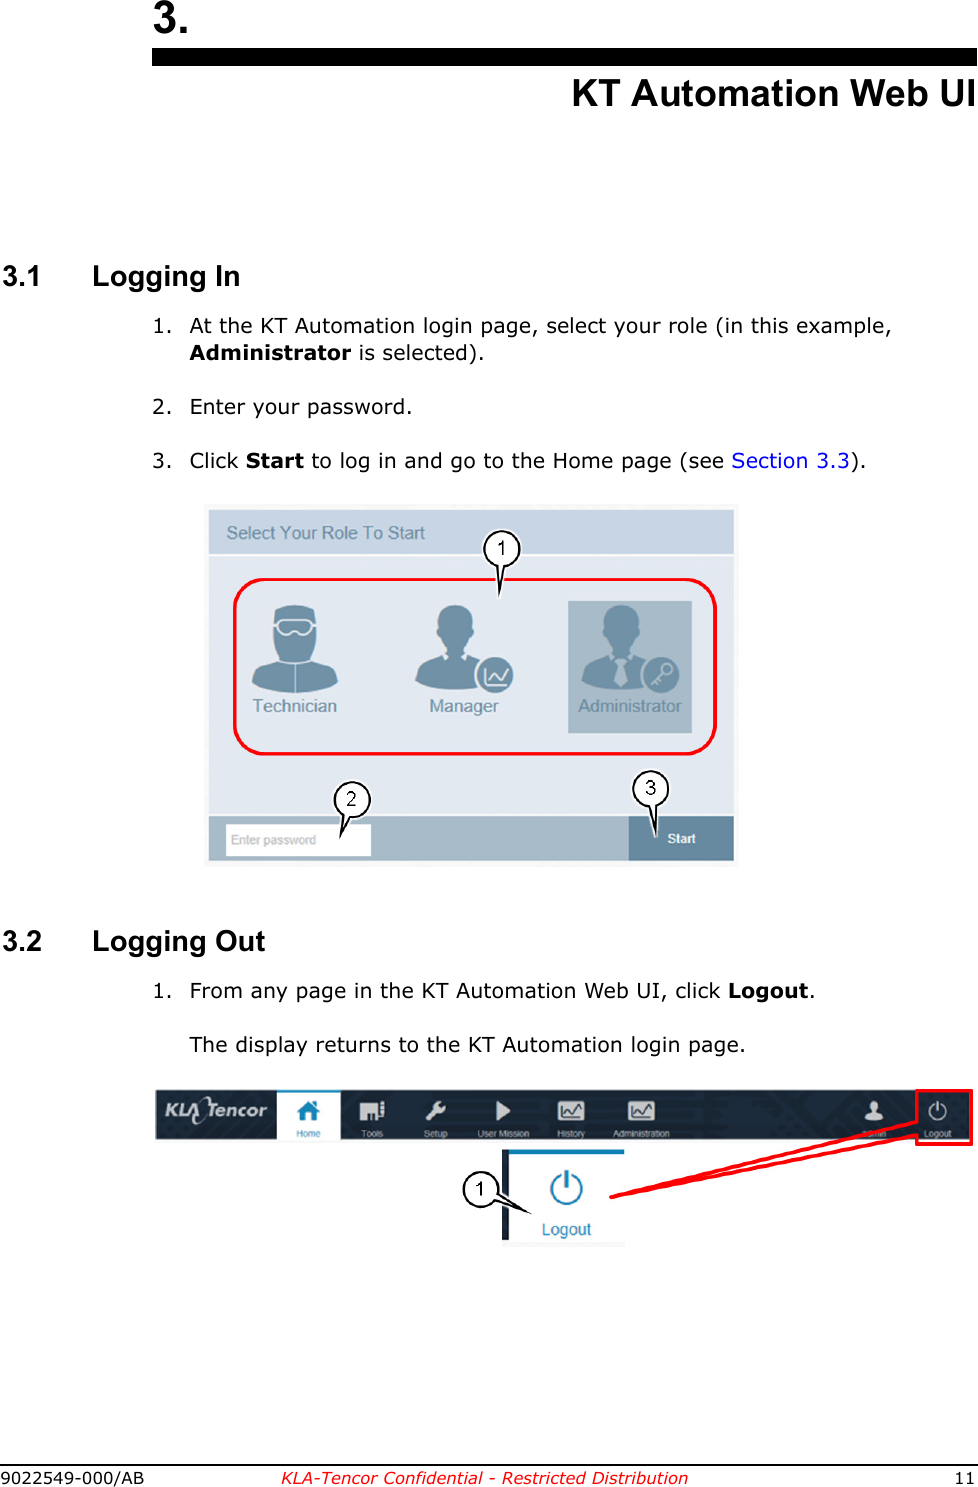 9022549-000/AB KLA-Tencor Confidential - Restricted Distribution 113.KT Automation Web UI3.1 Logging In1. At the KT Automation login page, select your role (in this example, Administrator is selected).2. Enter your password.3. Click Start to log in and go to the Home page (see Section 3.3).3.2 Logging Out1. From any page in the KT Automation Web UI, click Logout.The display returns to the KT Automation login page.